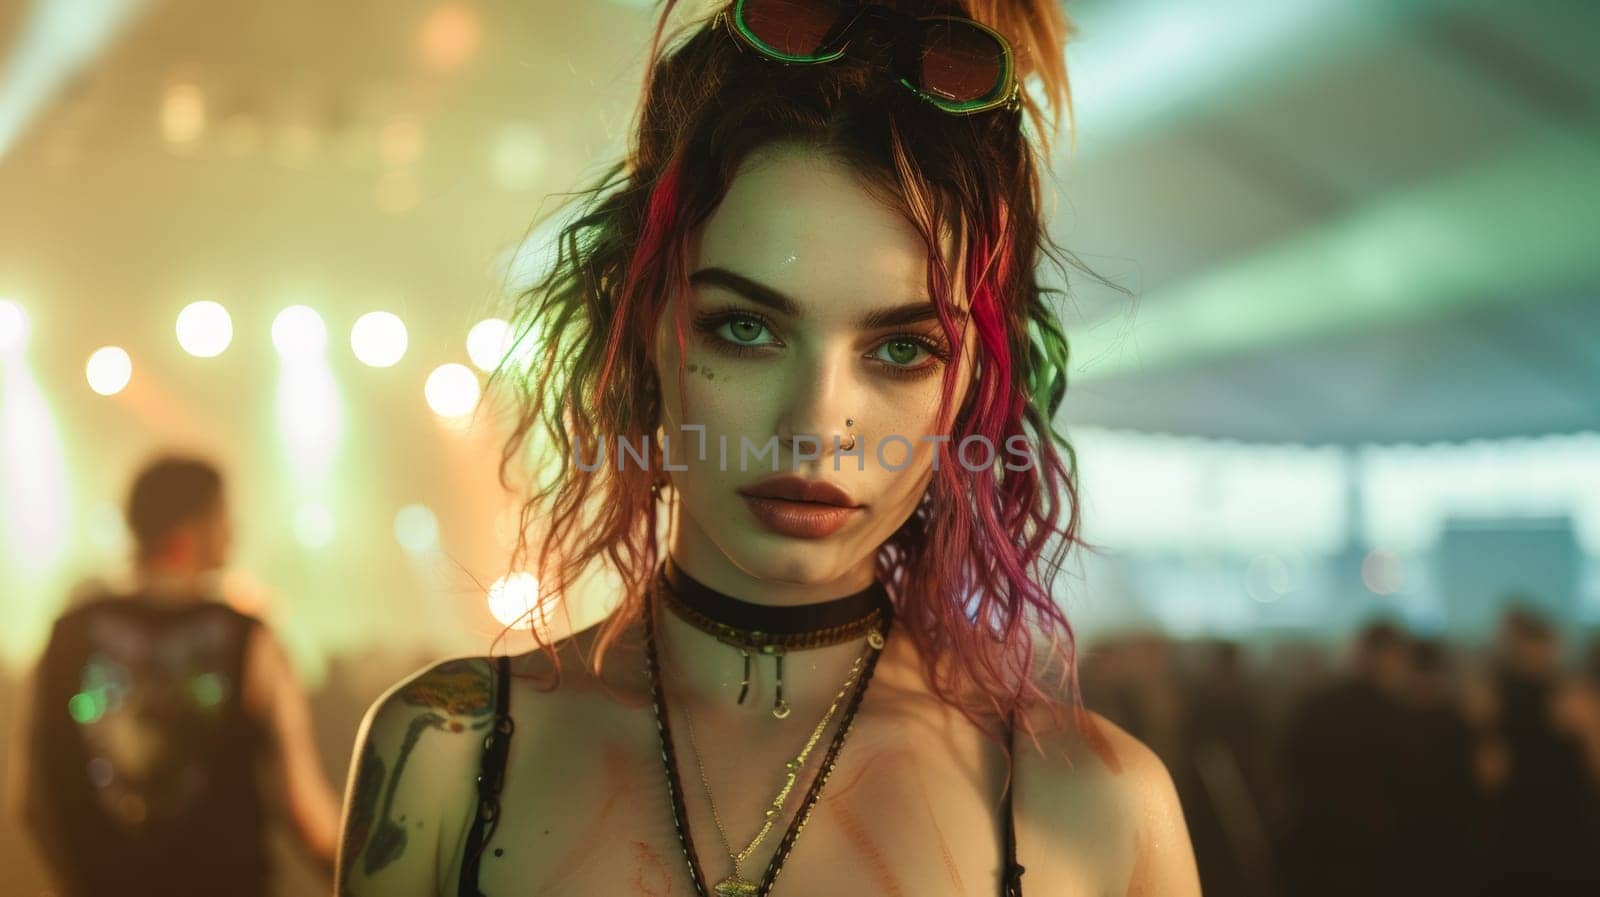 A woman with a tattooed face and piercings standing in front of people